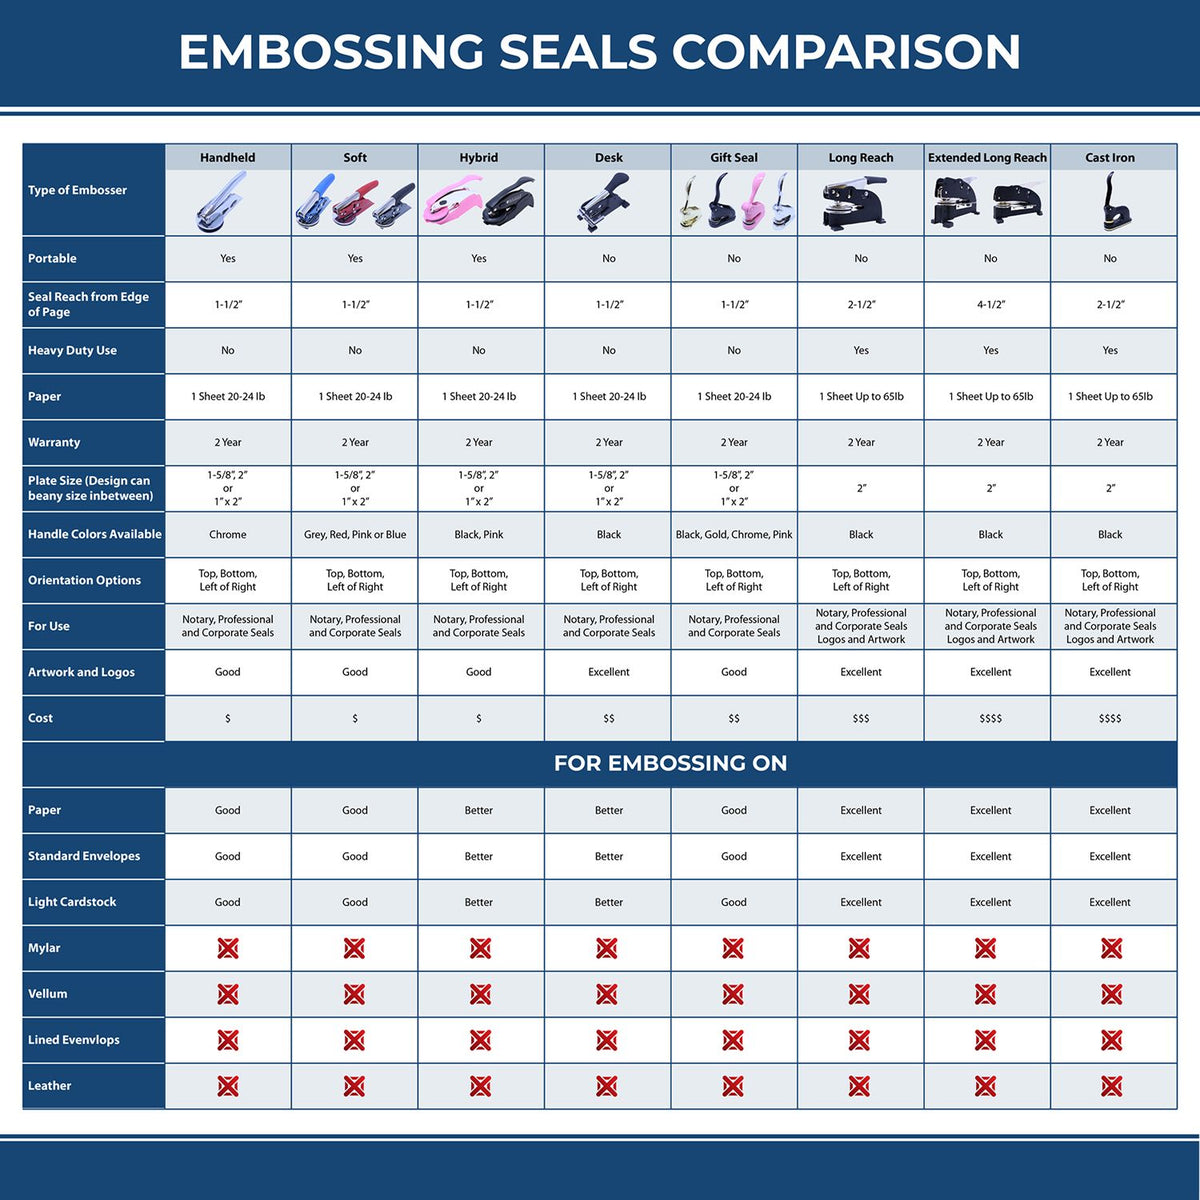 A comparison chart for the different types of mount models available for the State of Mississippi Soft Land Surveyor Embossing Seal.